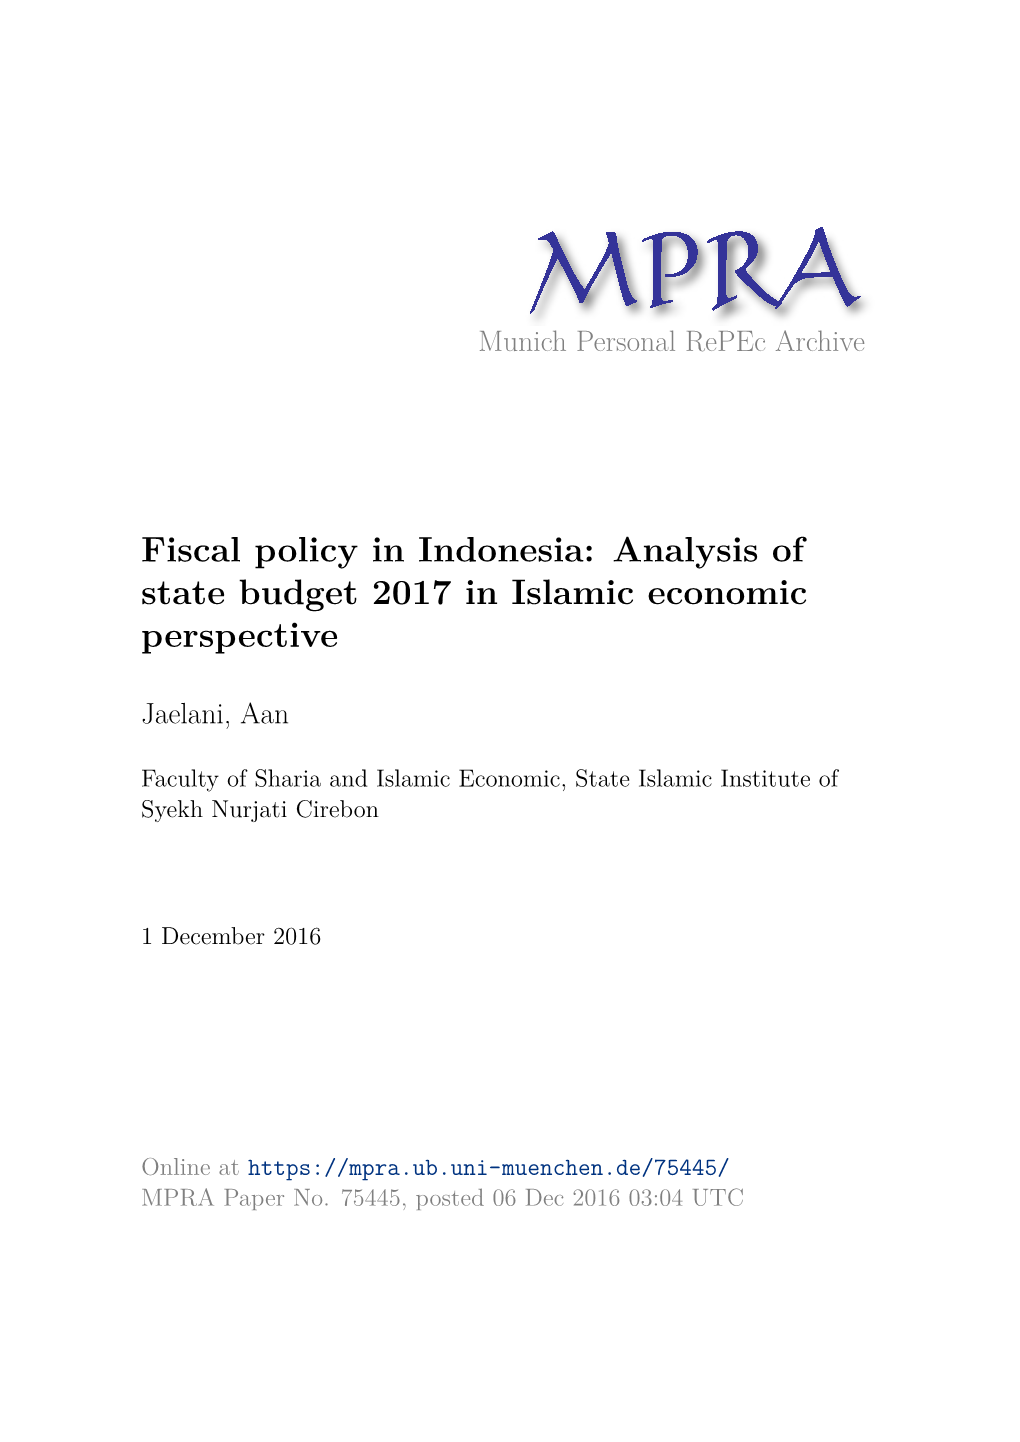 Fiscal Policy in Indonesia: Analysis of State Budget 2017 in Islamic Economic Perspective